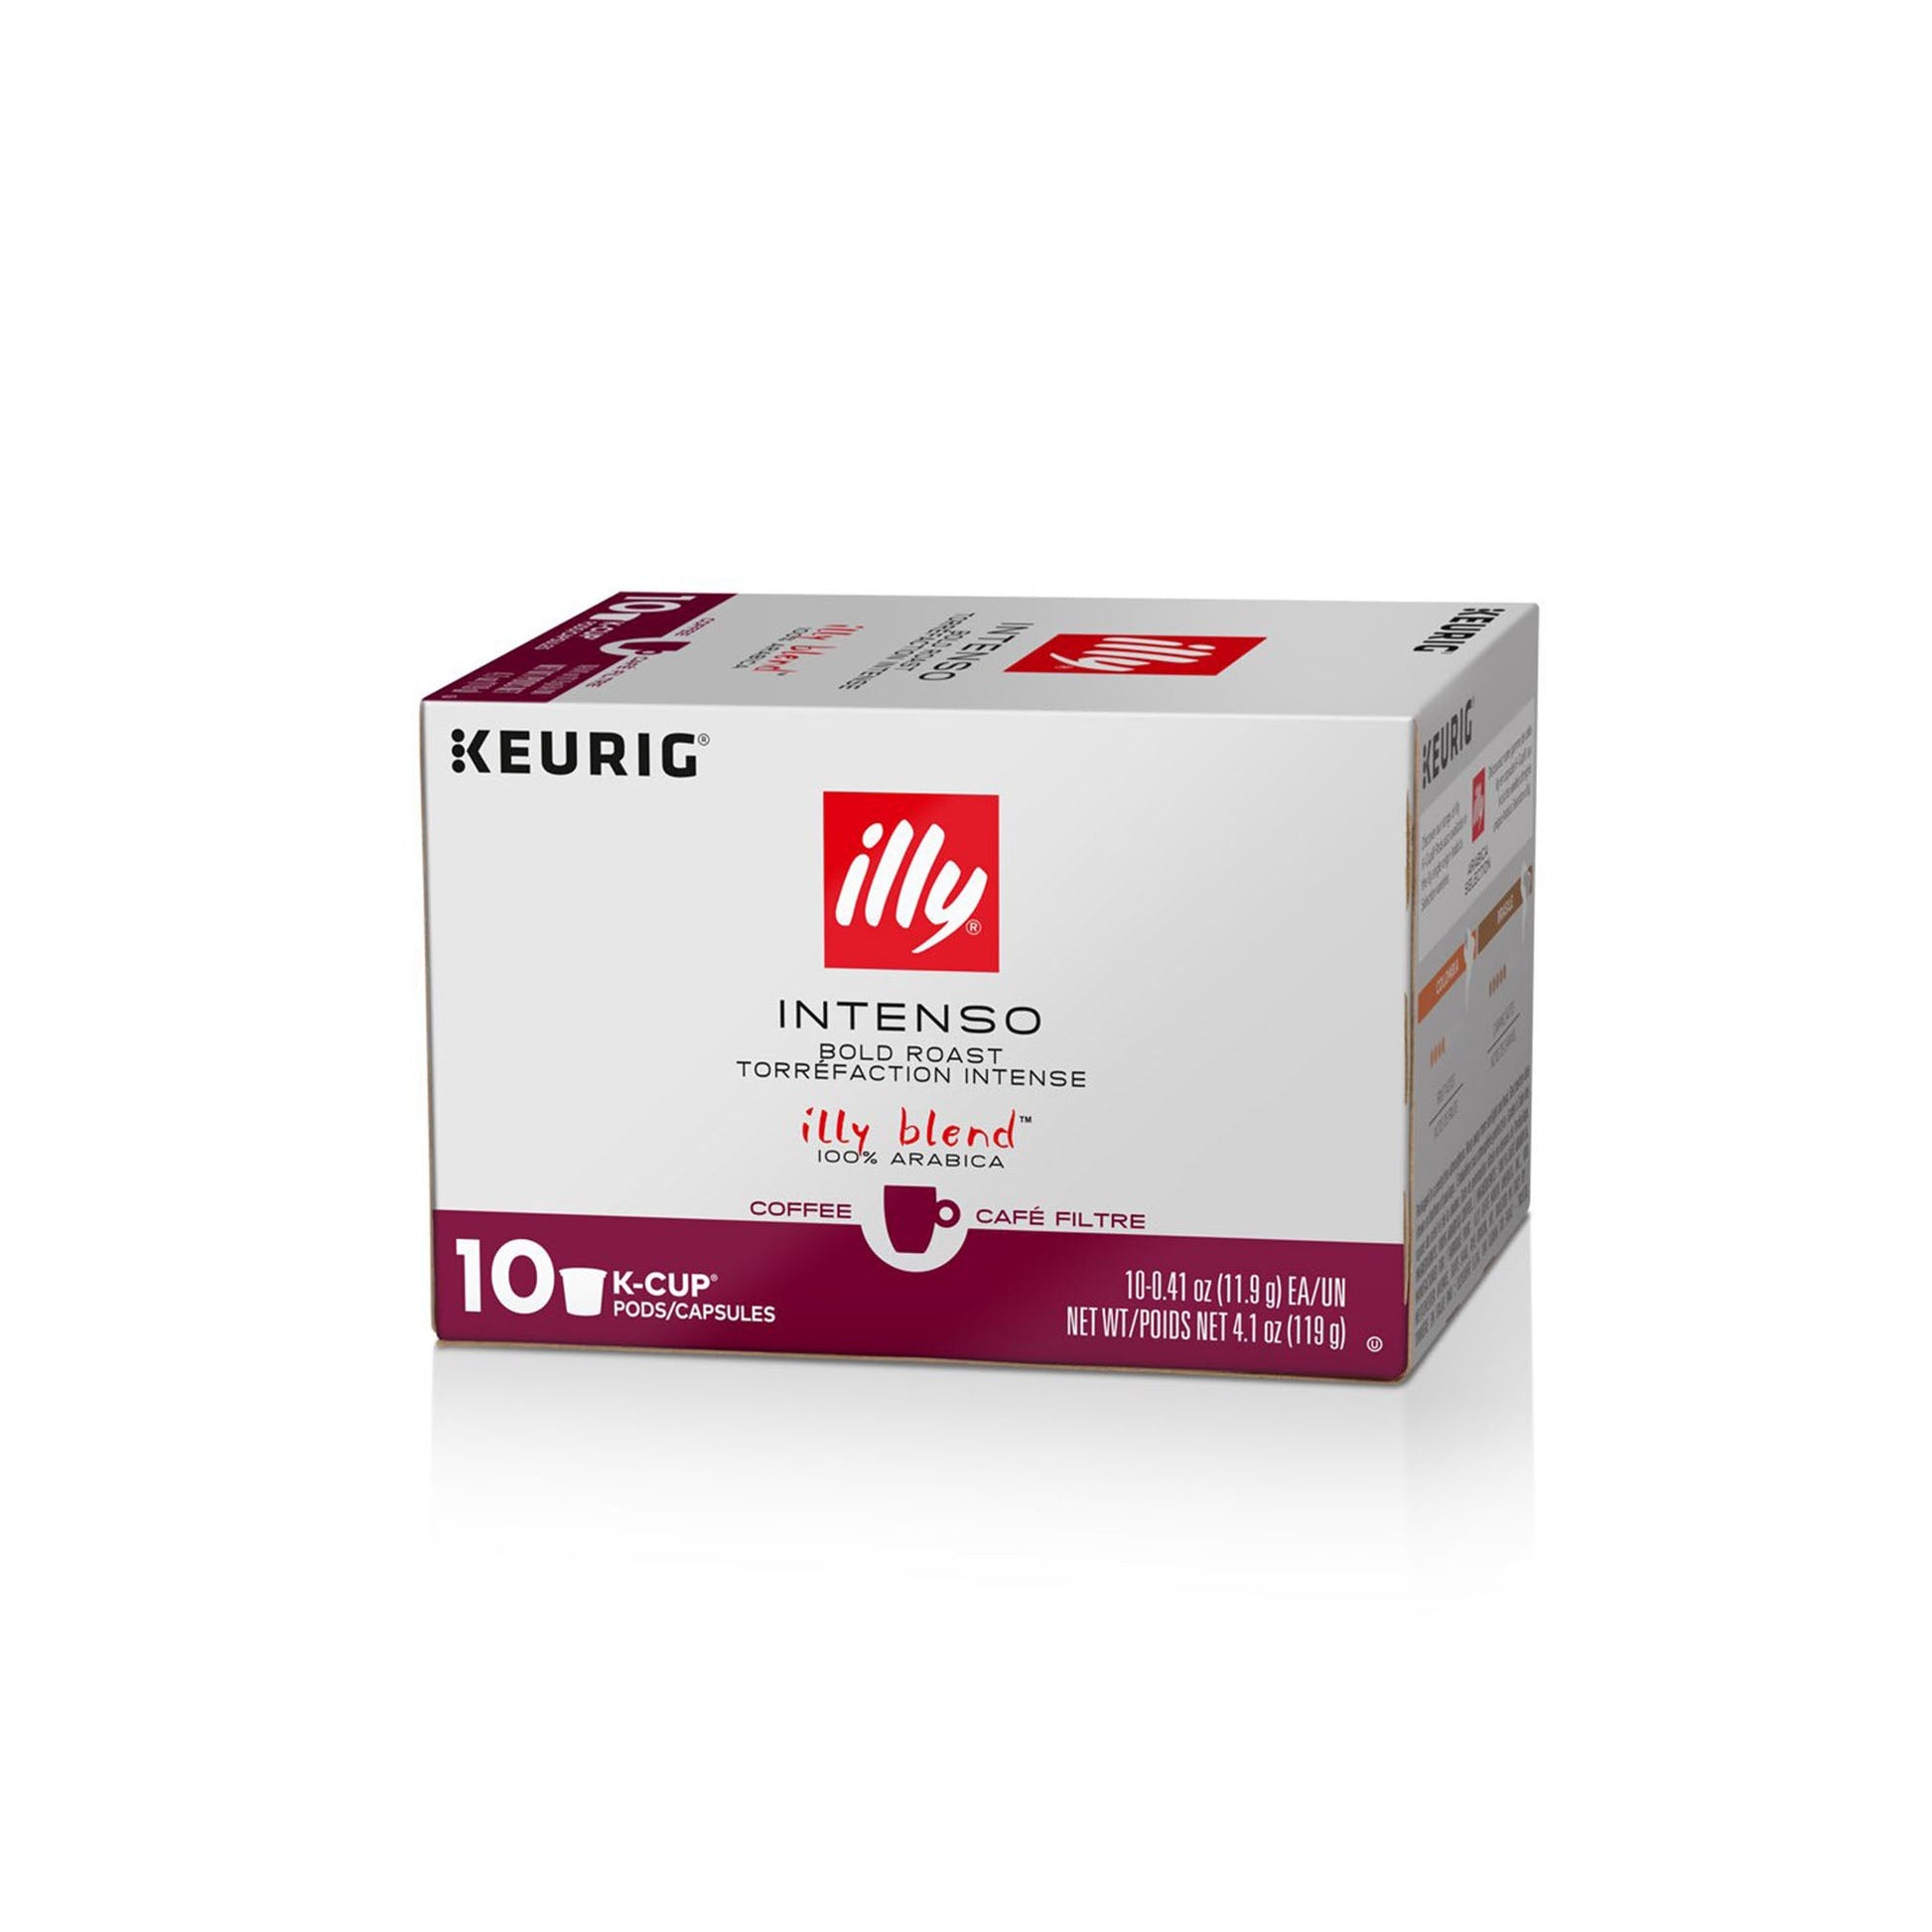 Illy Intenso 10 Pods